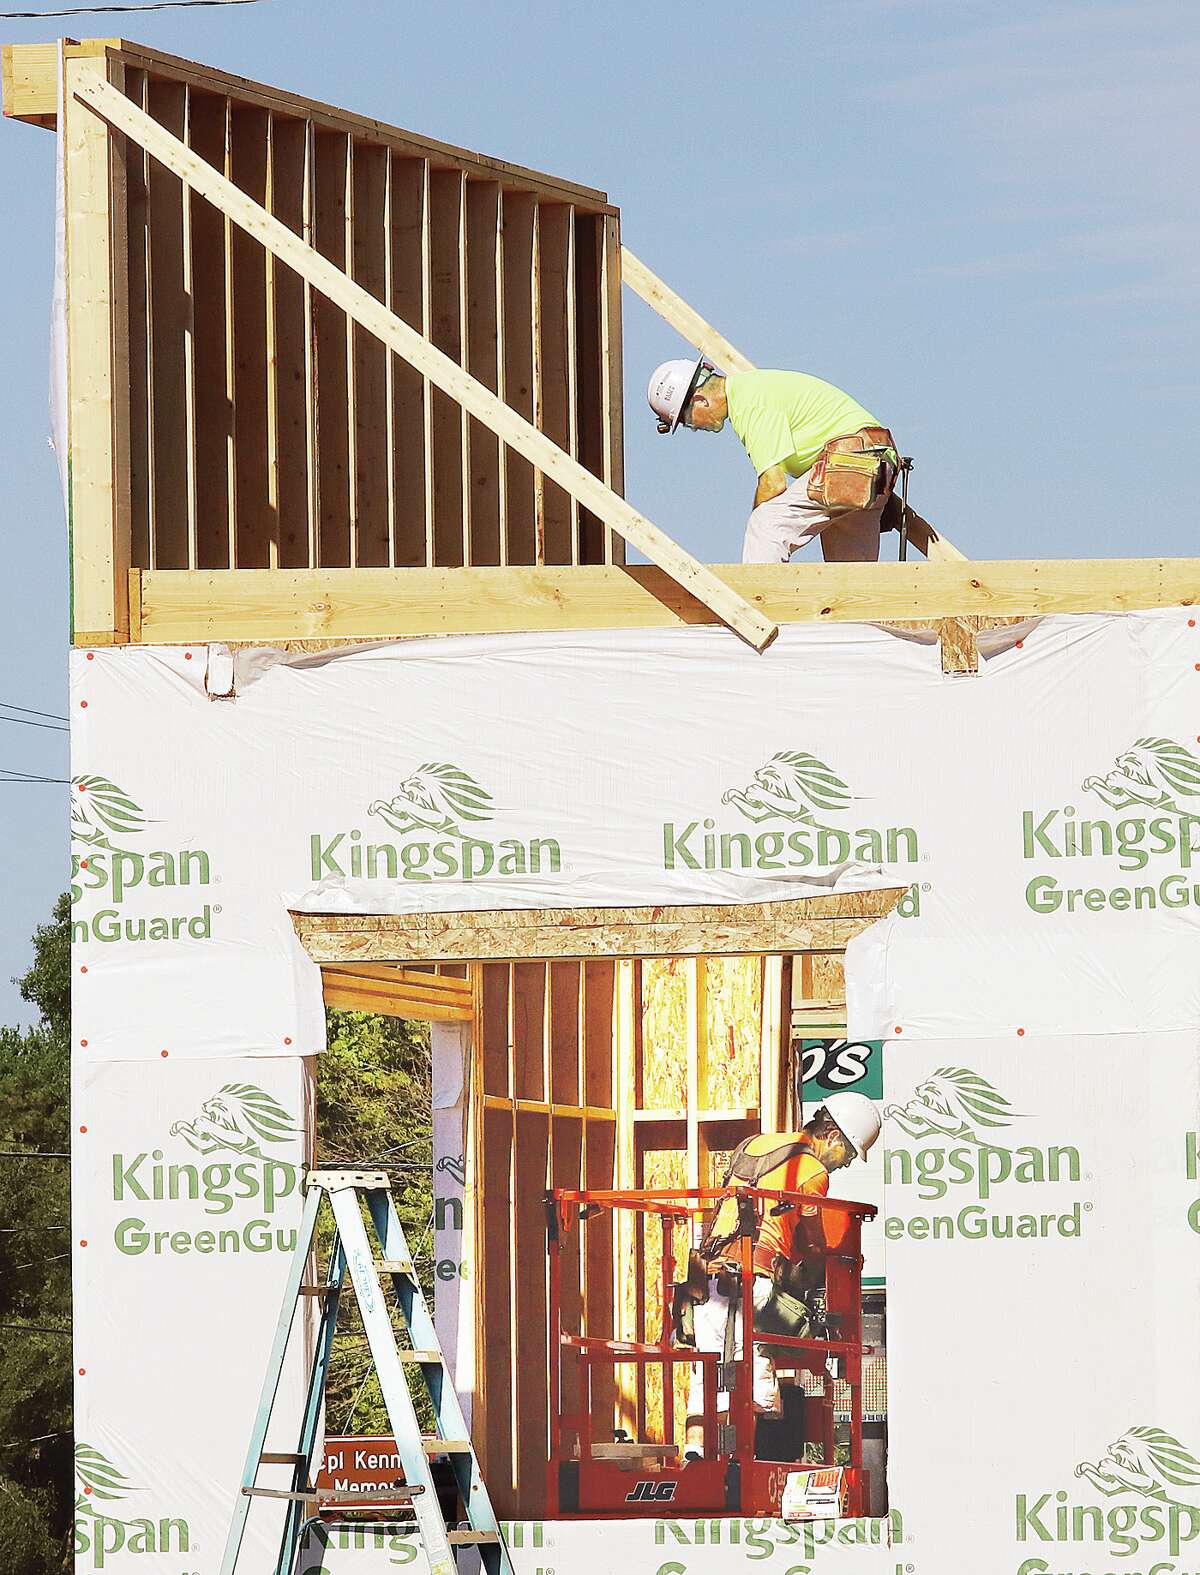 John Badman|The Telegraph Construction workers were inside and on top of the newly framed Scooter's Coffee building under construction at the corner of Route 140 and Prairie Street in Betalto Monday. Work is progressing on the coffee chain's third Illinois location. Drive-thru coffee stands are already open in Glen Carbon and Jerseyville. The national chain has more than 300 locations in 20 states and sells baked from scratch pastries along with its specialty coffee.